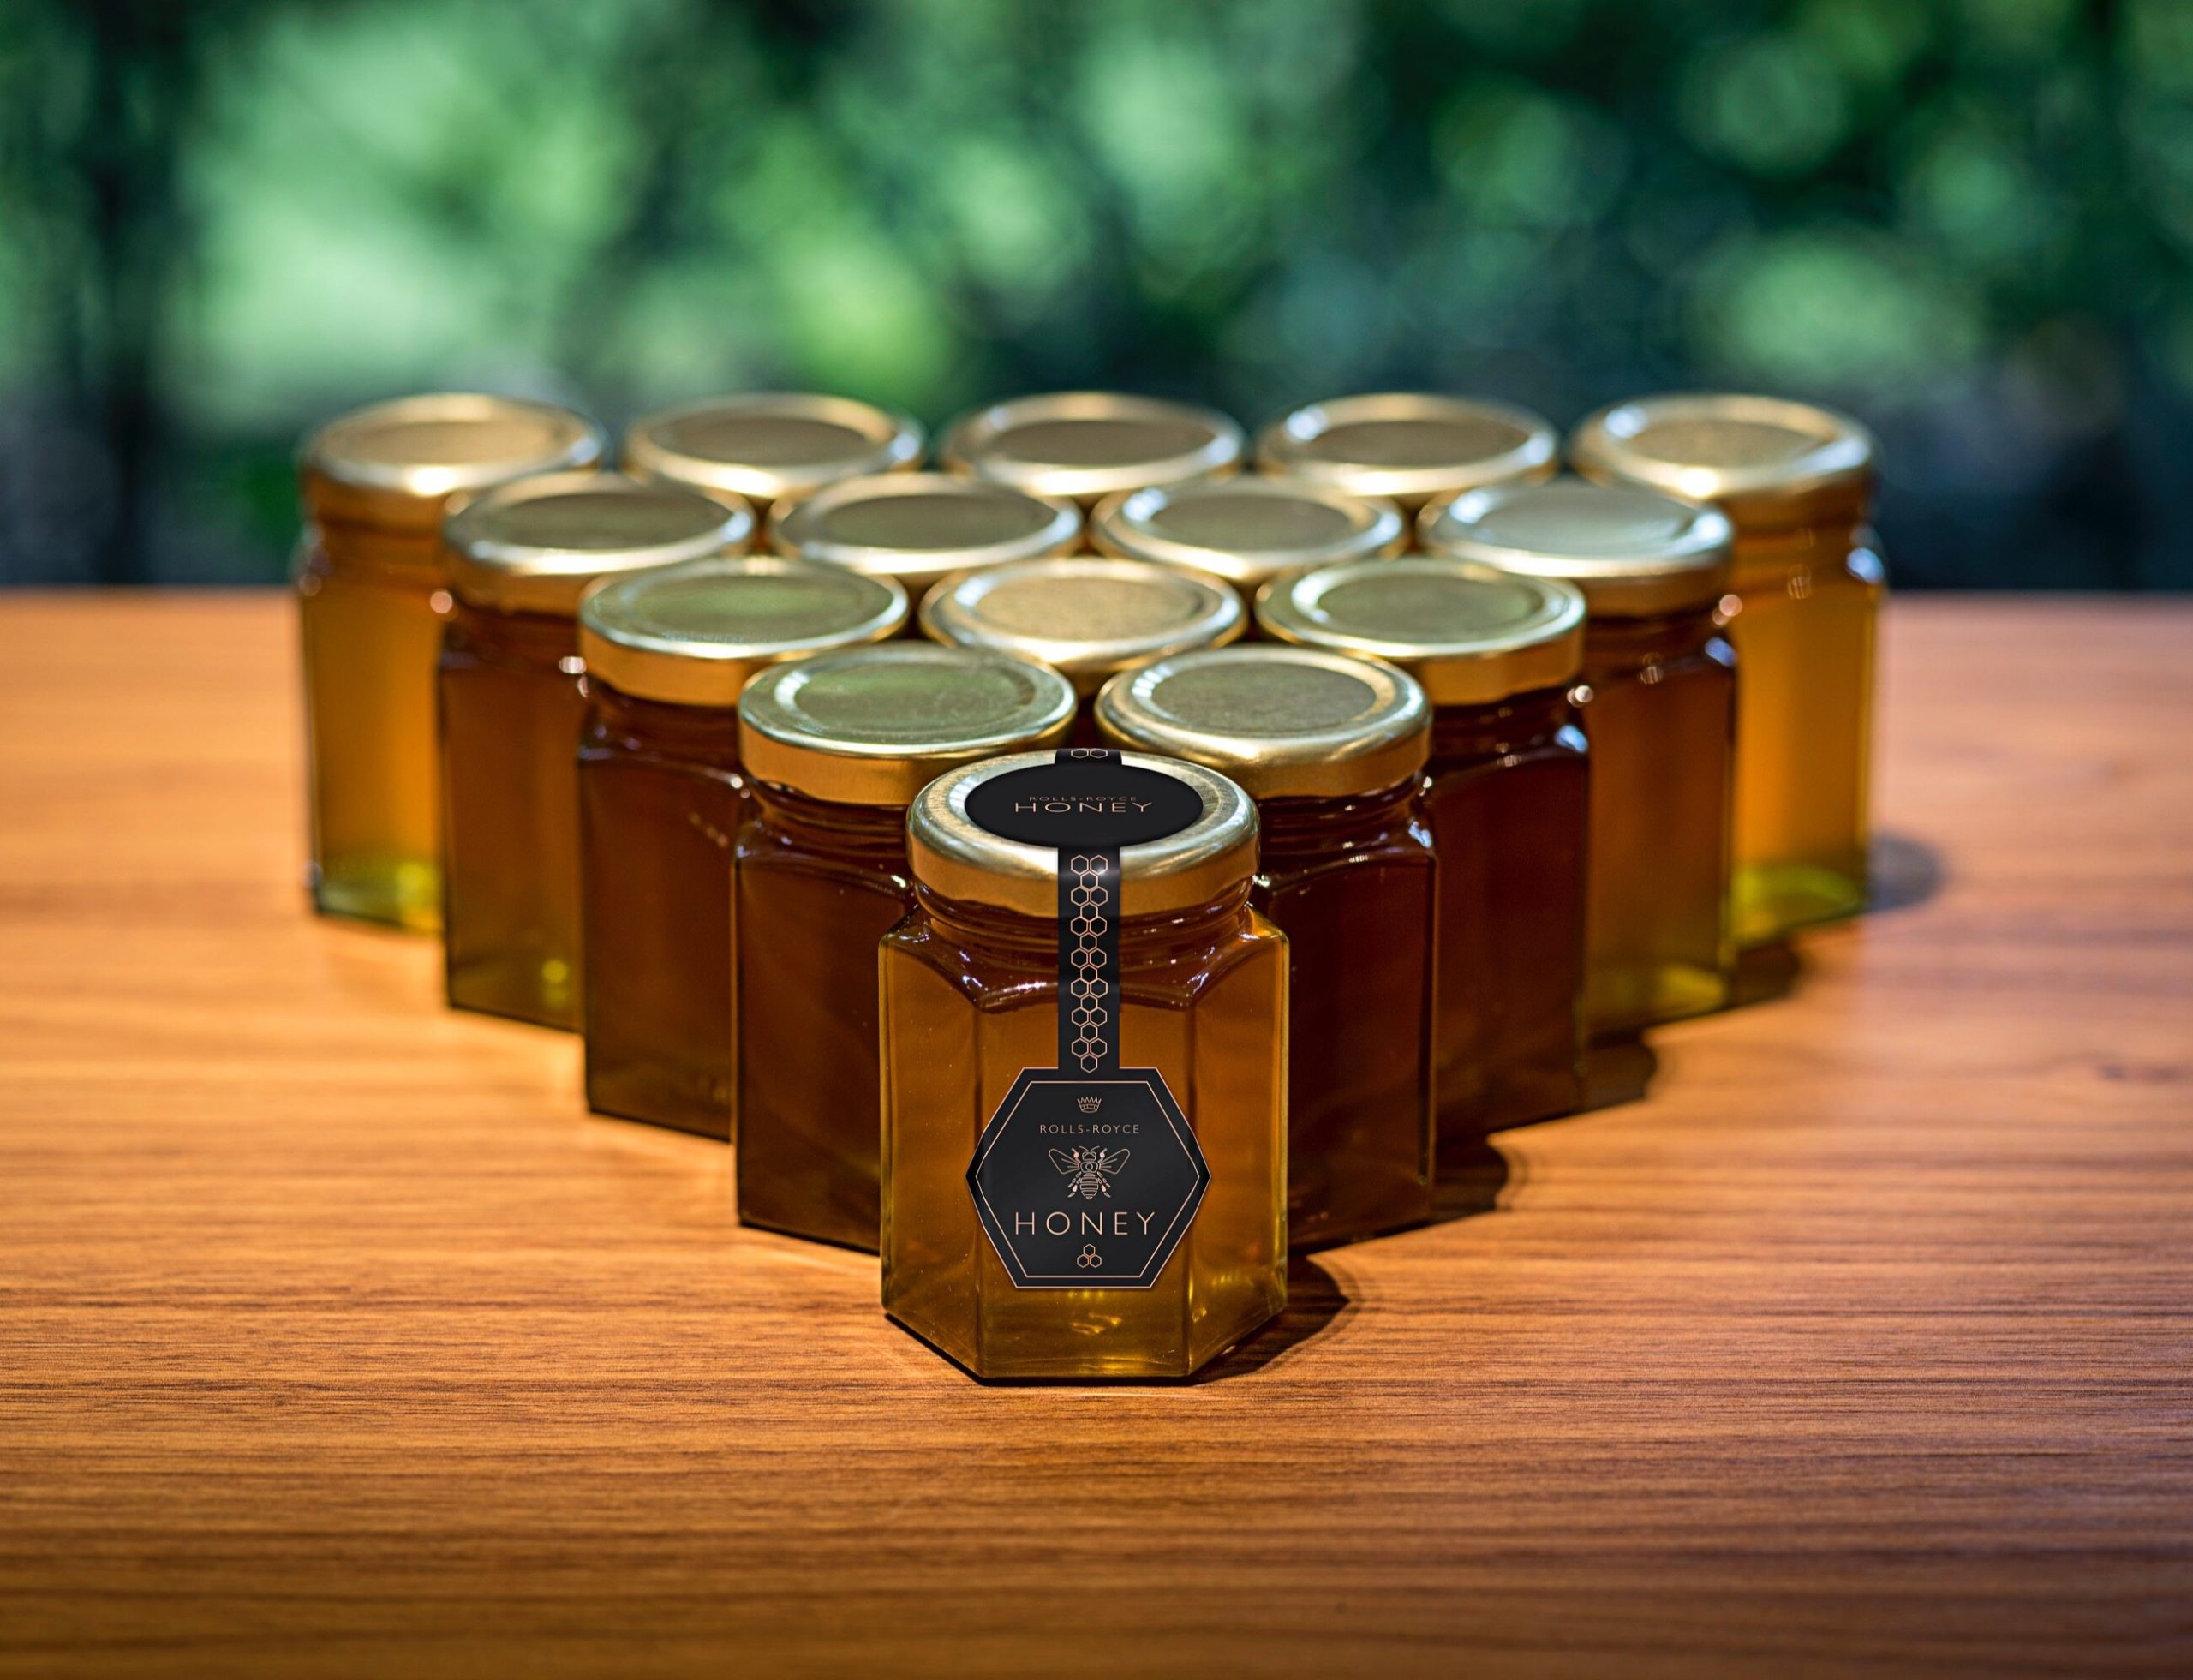 Honey from... Rolls-Royce?  Bees don't stop producing